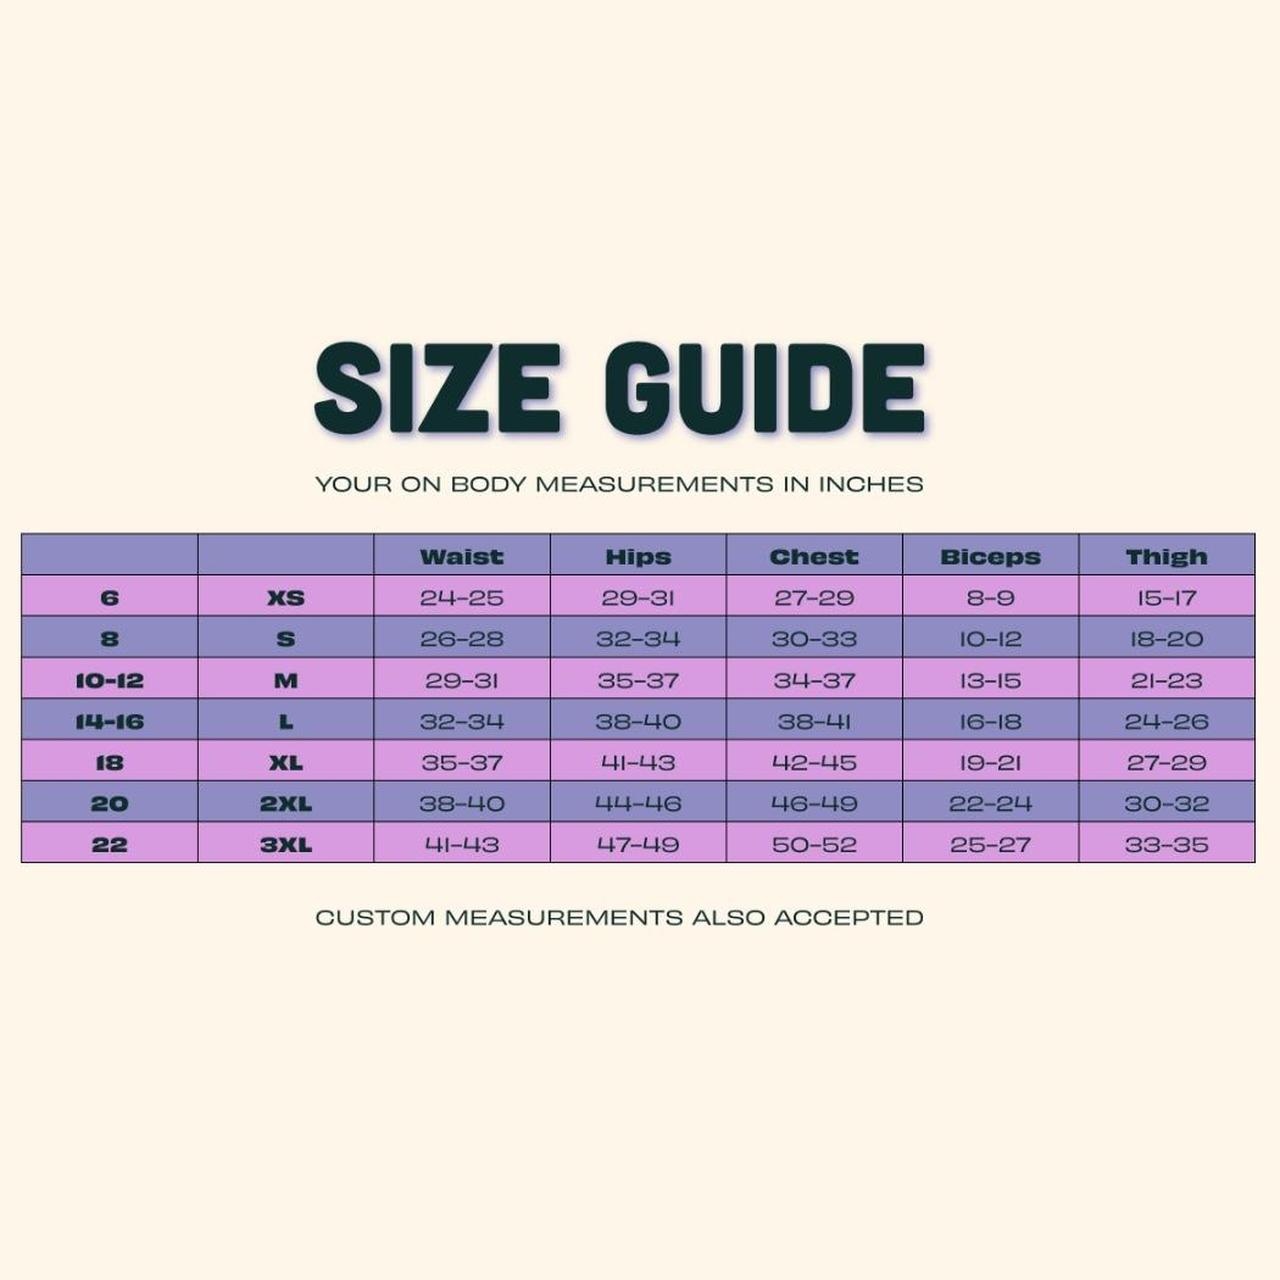 What Are Measurements for a Size 12?